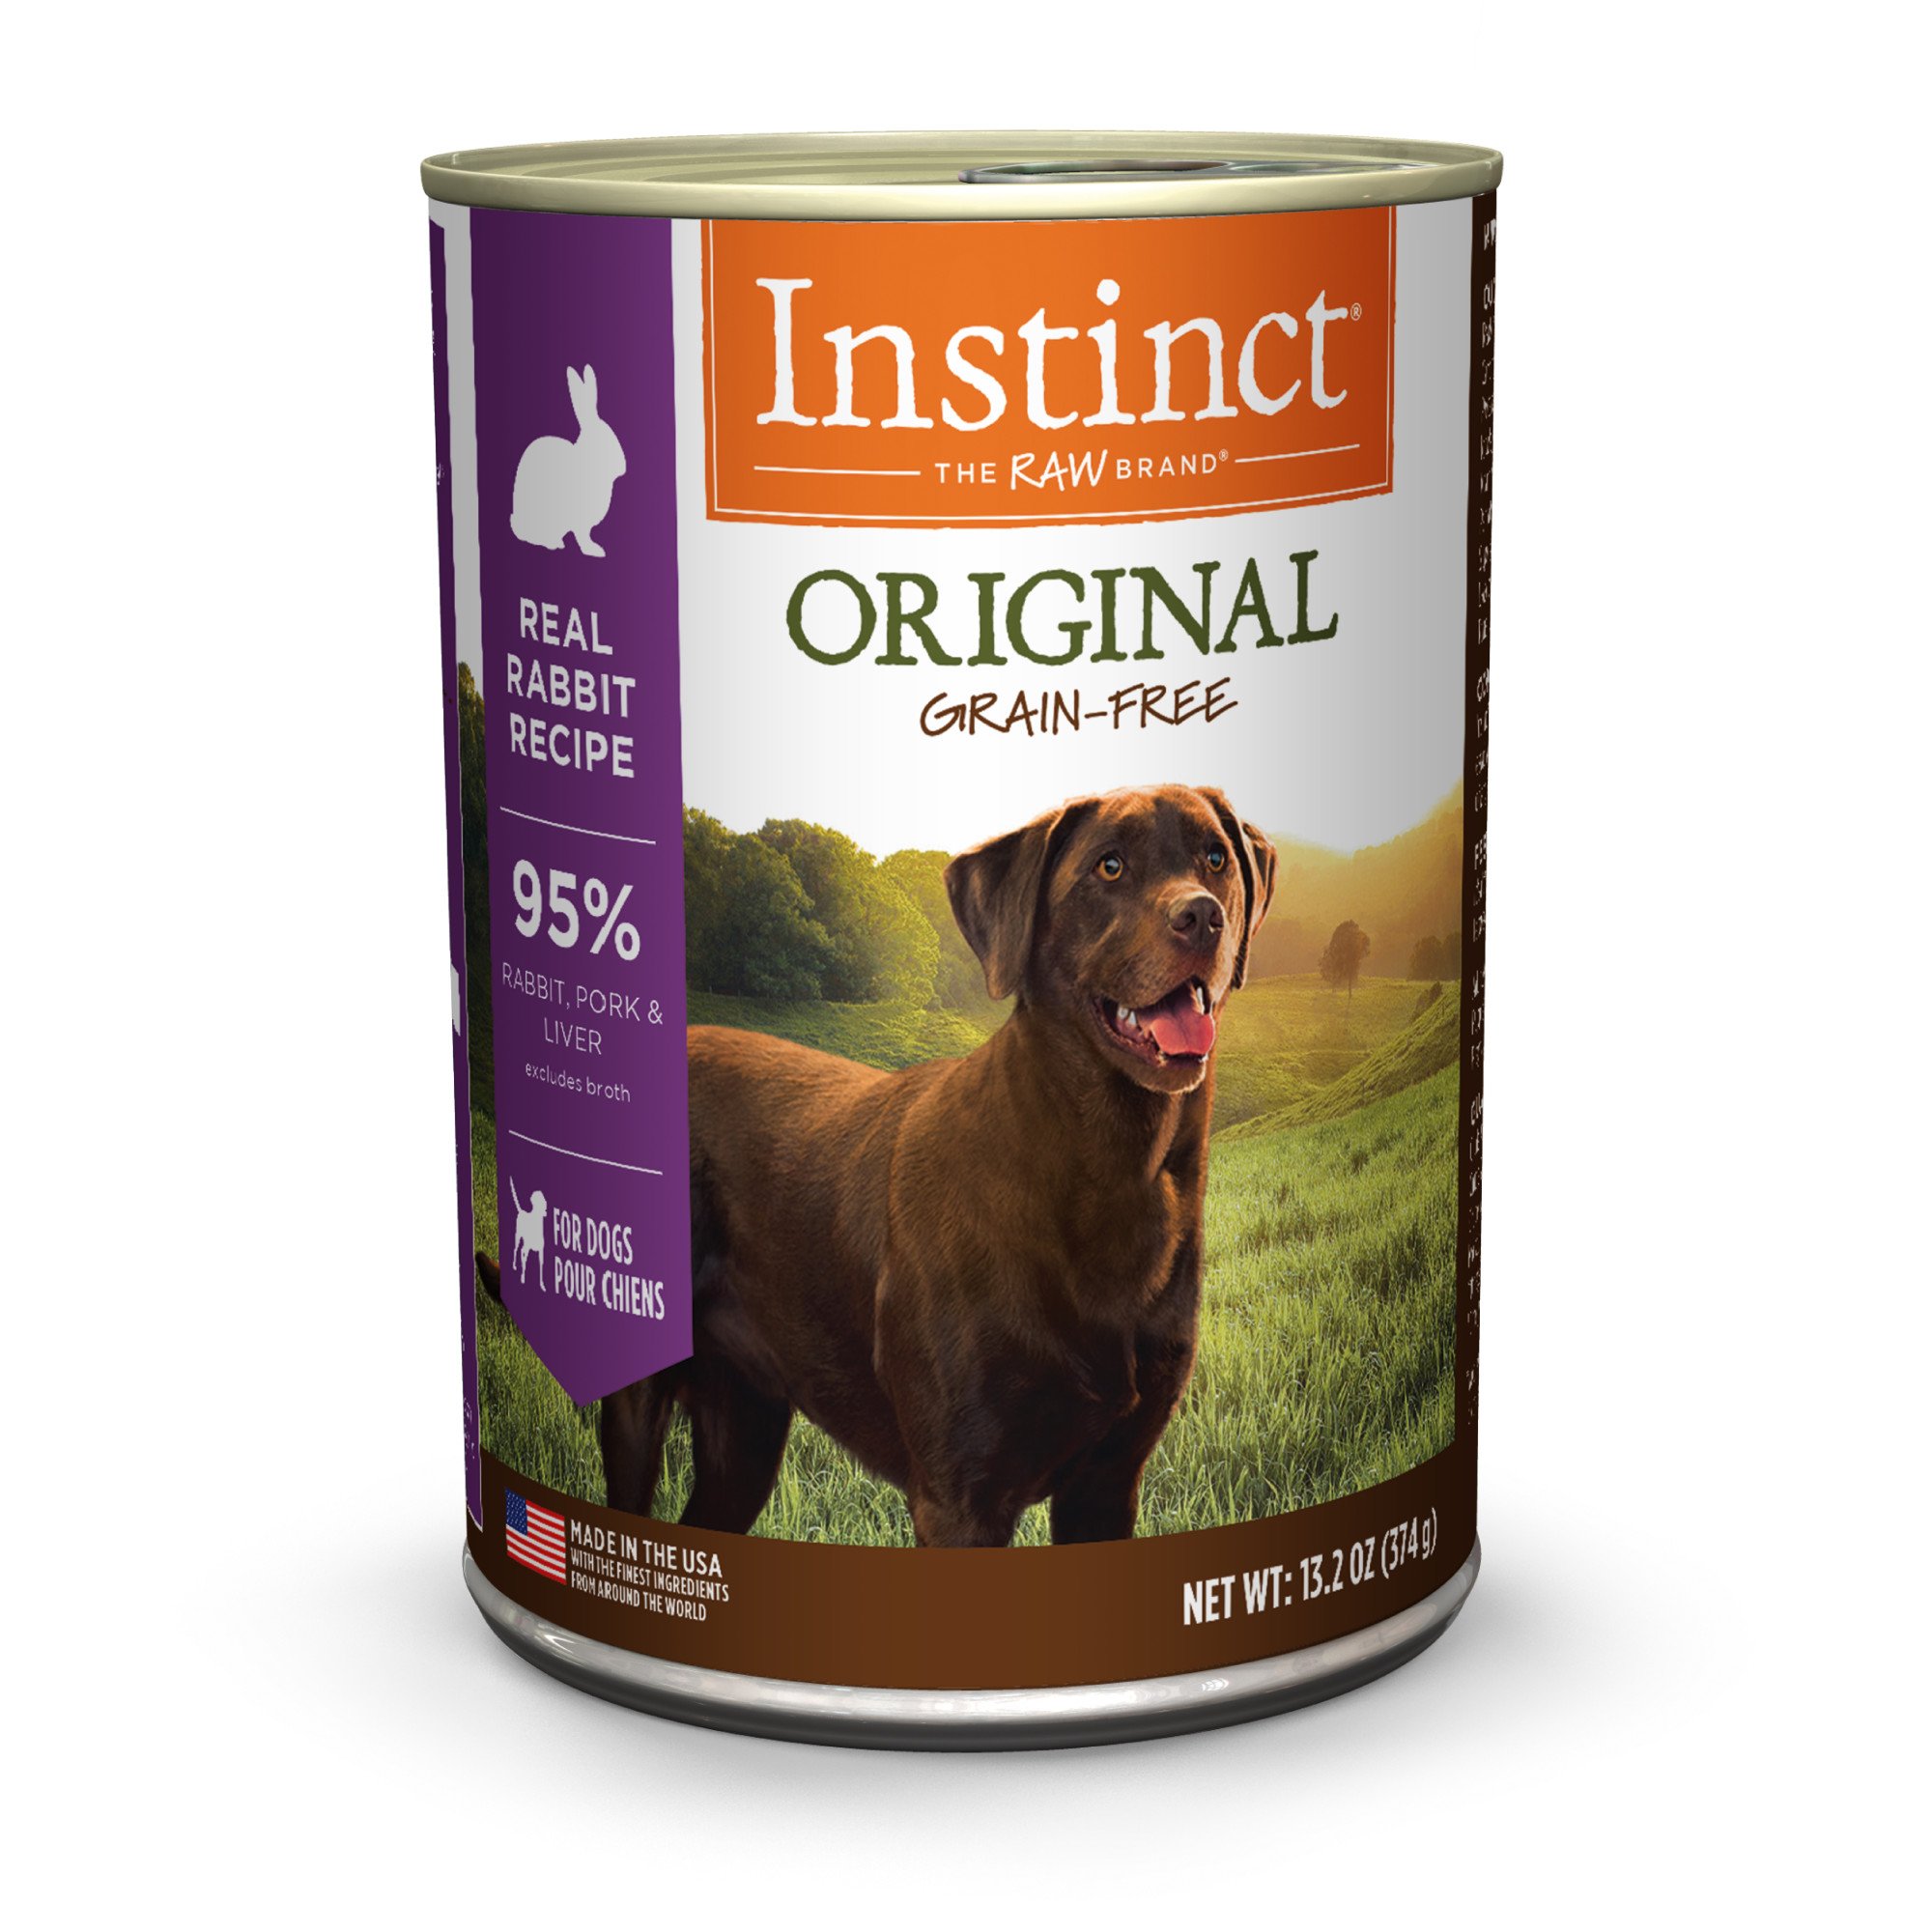 Instinct GrainFree Rabbit Canned Dog Food by Nature's